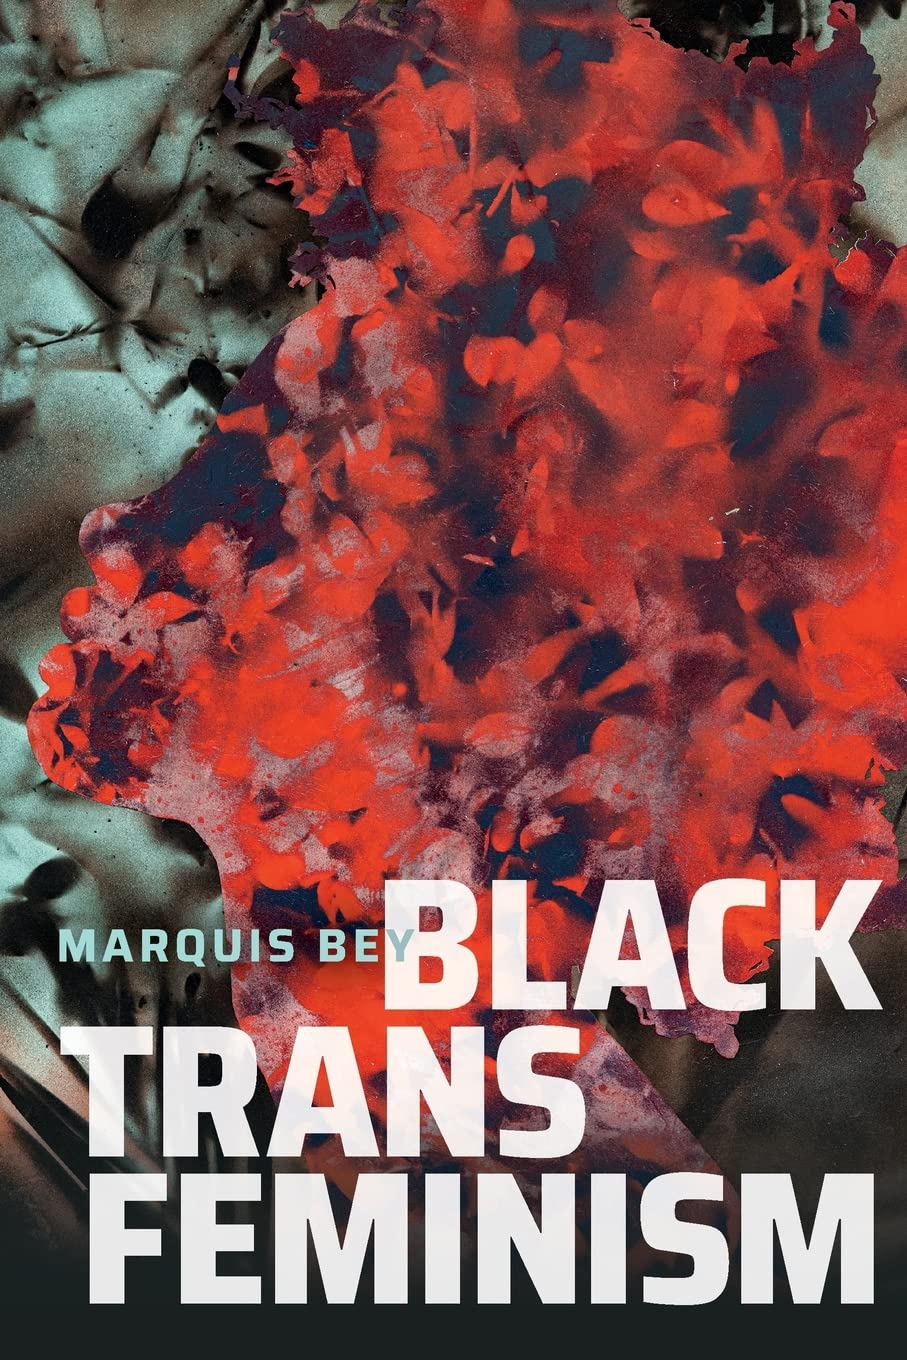 Black Trans Feminism, by Marquis Bey